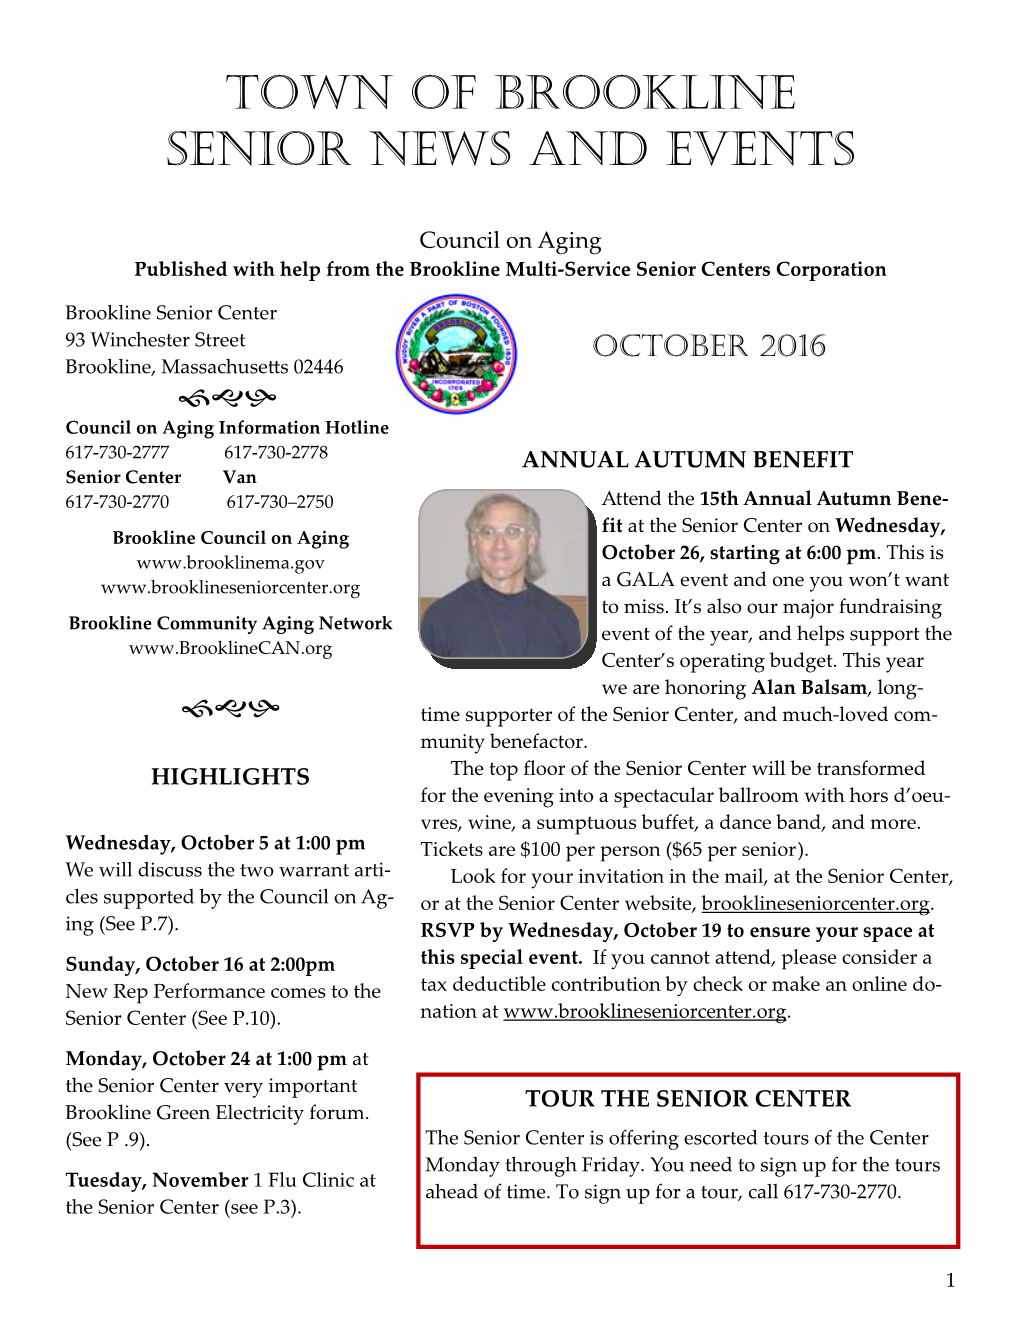 Council on Aging Newsletter October 2016